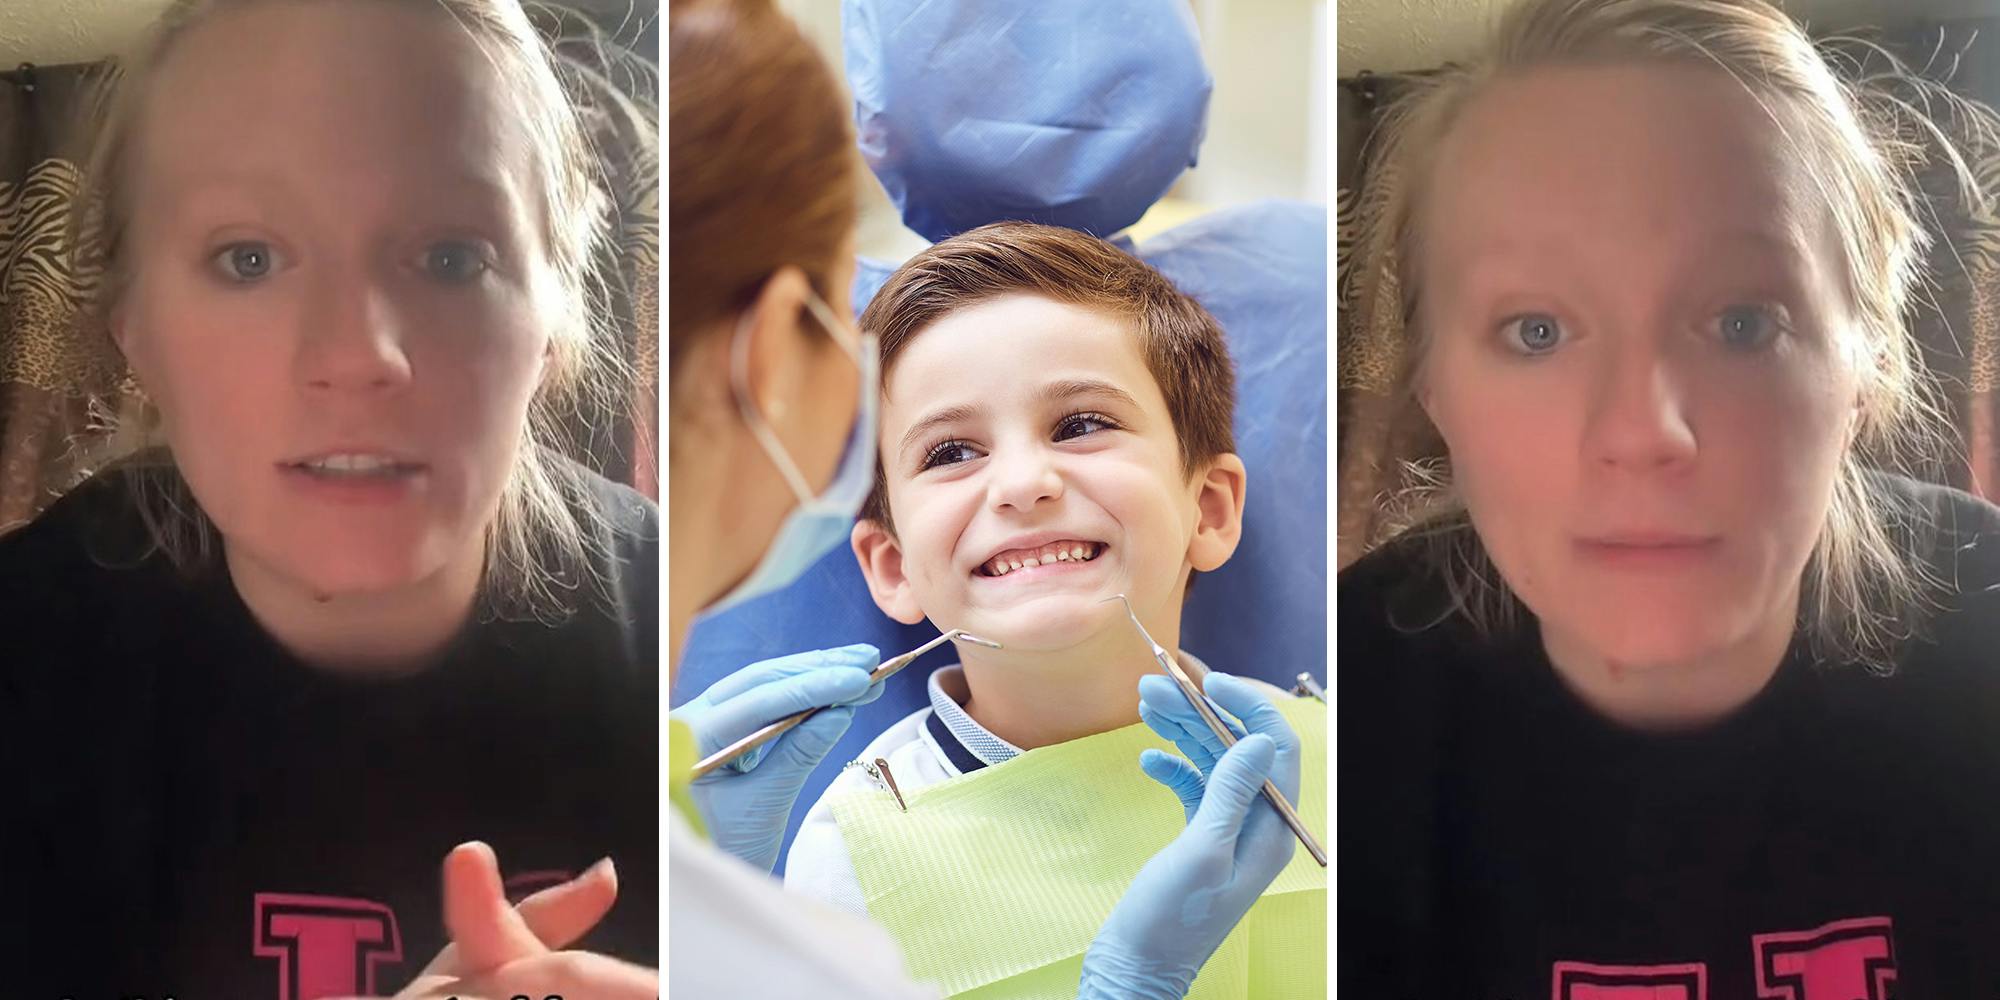 Mom says school scheduled dental surgery for her kids without consent. There’s nothing wrong with them